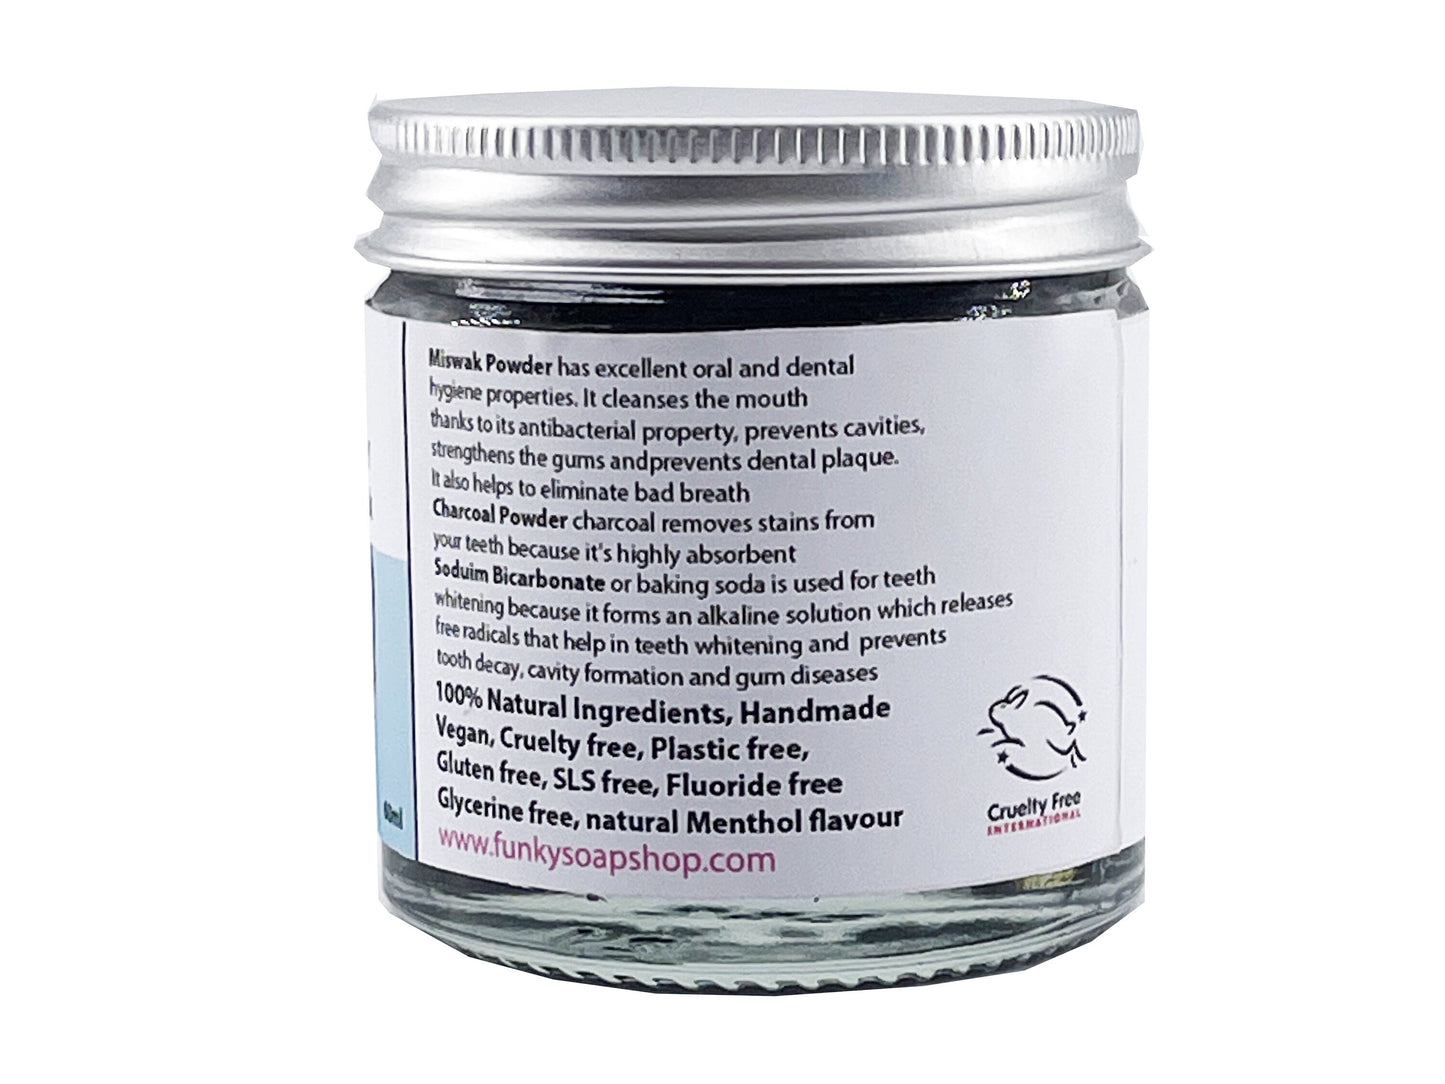 Charcoal and Miswak Natural Tooth Powder, 60ml - Funky Soap Shop